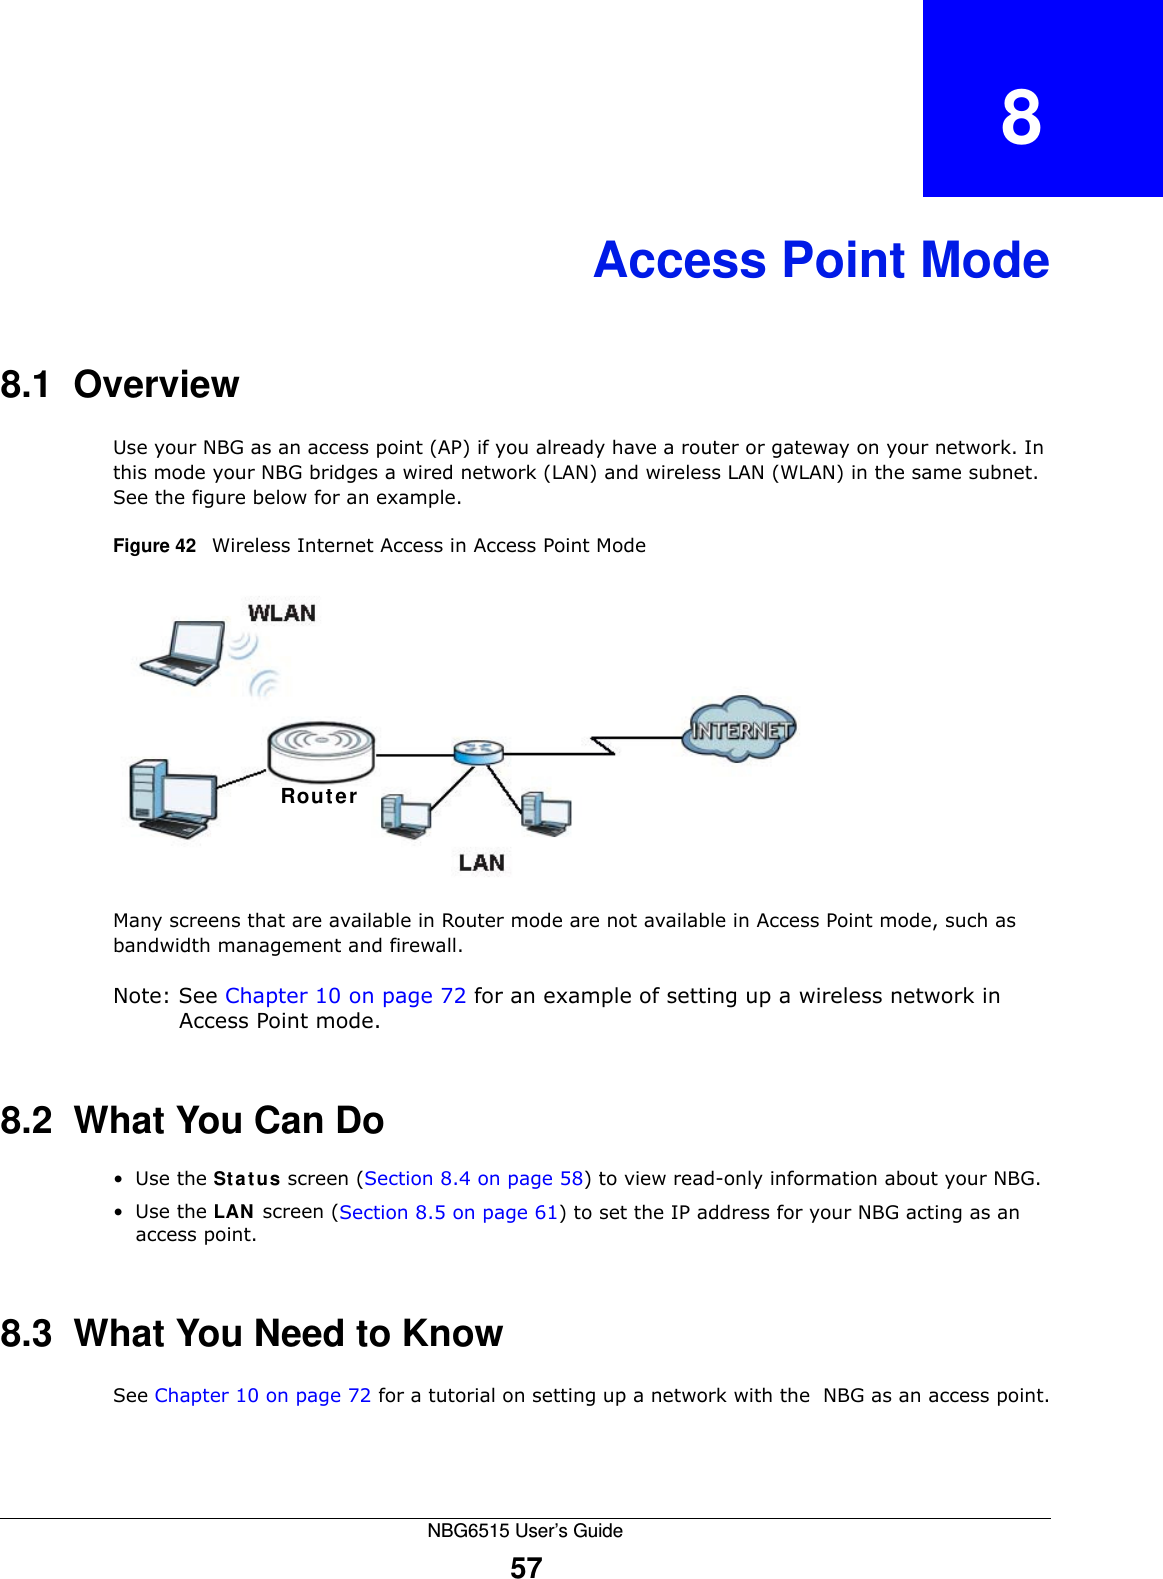 NBG6515 User’s Guide57CHAPTER   8Access Point Mode8.1  OverviewUse your NBG as an access point (AP) if you already have a router or gateway on your network. In this mode your NBG bridges a wired network (LAN) and wireless LAN (WLAN) in the same subnet. See the figure below for an example.Figure 42   Wireless Internet Access in Access Point Mode Many screens that are available in Router mode are not available in Access Point mode, such as bandwidth management and firewall.Note: See Chapter 10 on page 72 for an example of setting up a wireless network in Access Point mode. 8.2  What You Can Do•Use the Status screen (Section 8.4 on page 58) to view read-only information about your NBG.•Use the LAN screen (Section 8.5 on page 61) to set the IP address for your NBG acting as an access point.8.3  What You Need to KnowSee Chapter 10 on page 72 for a tutorial on setting up a network with the  NBG as an access point.Router